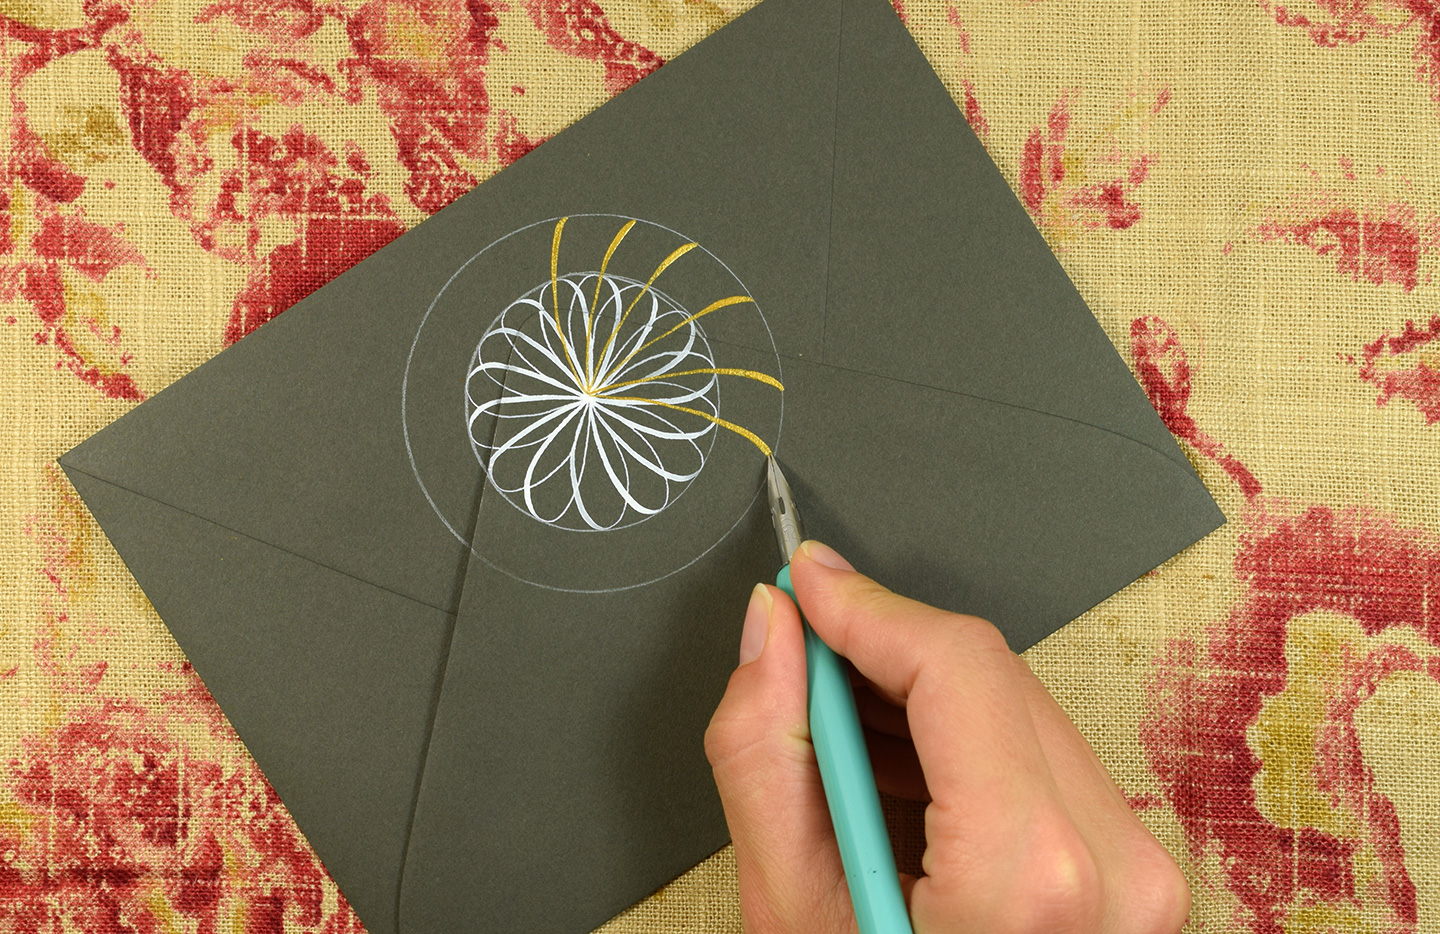 7 Short Art Projects to Help You Decompress